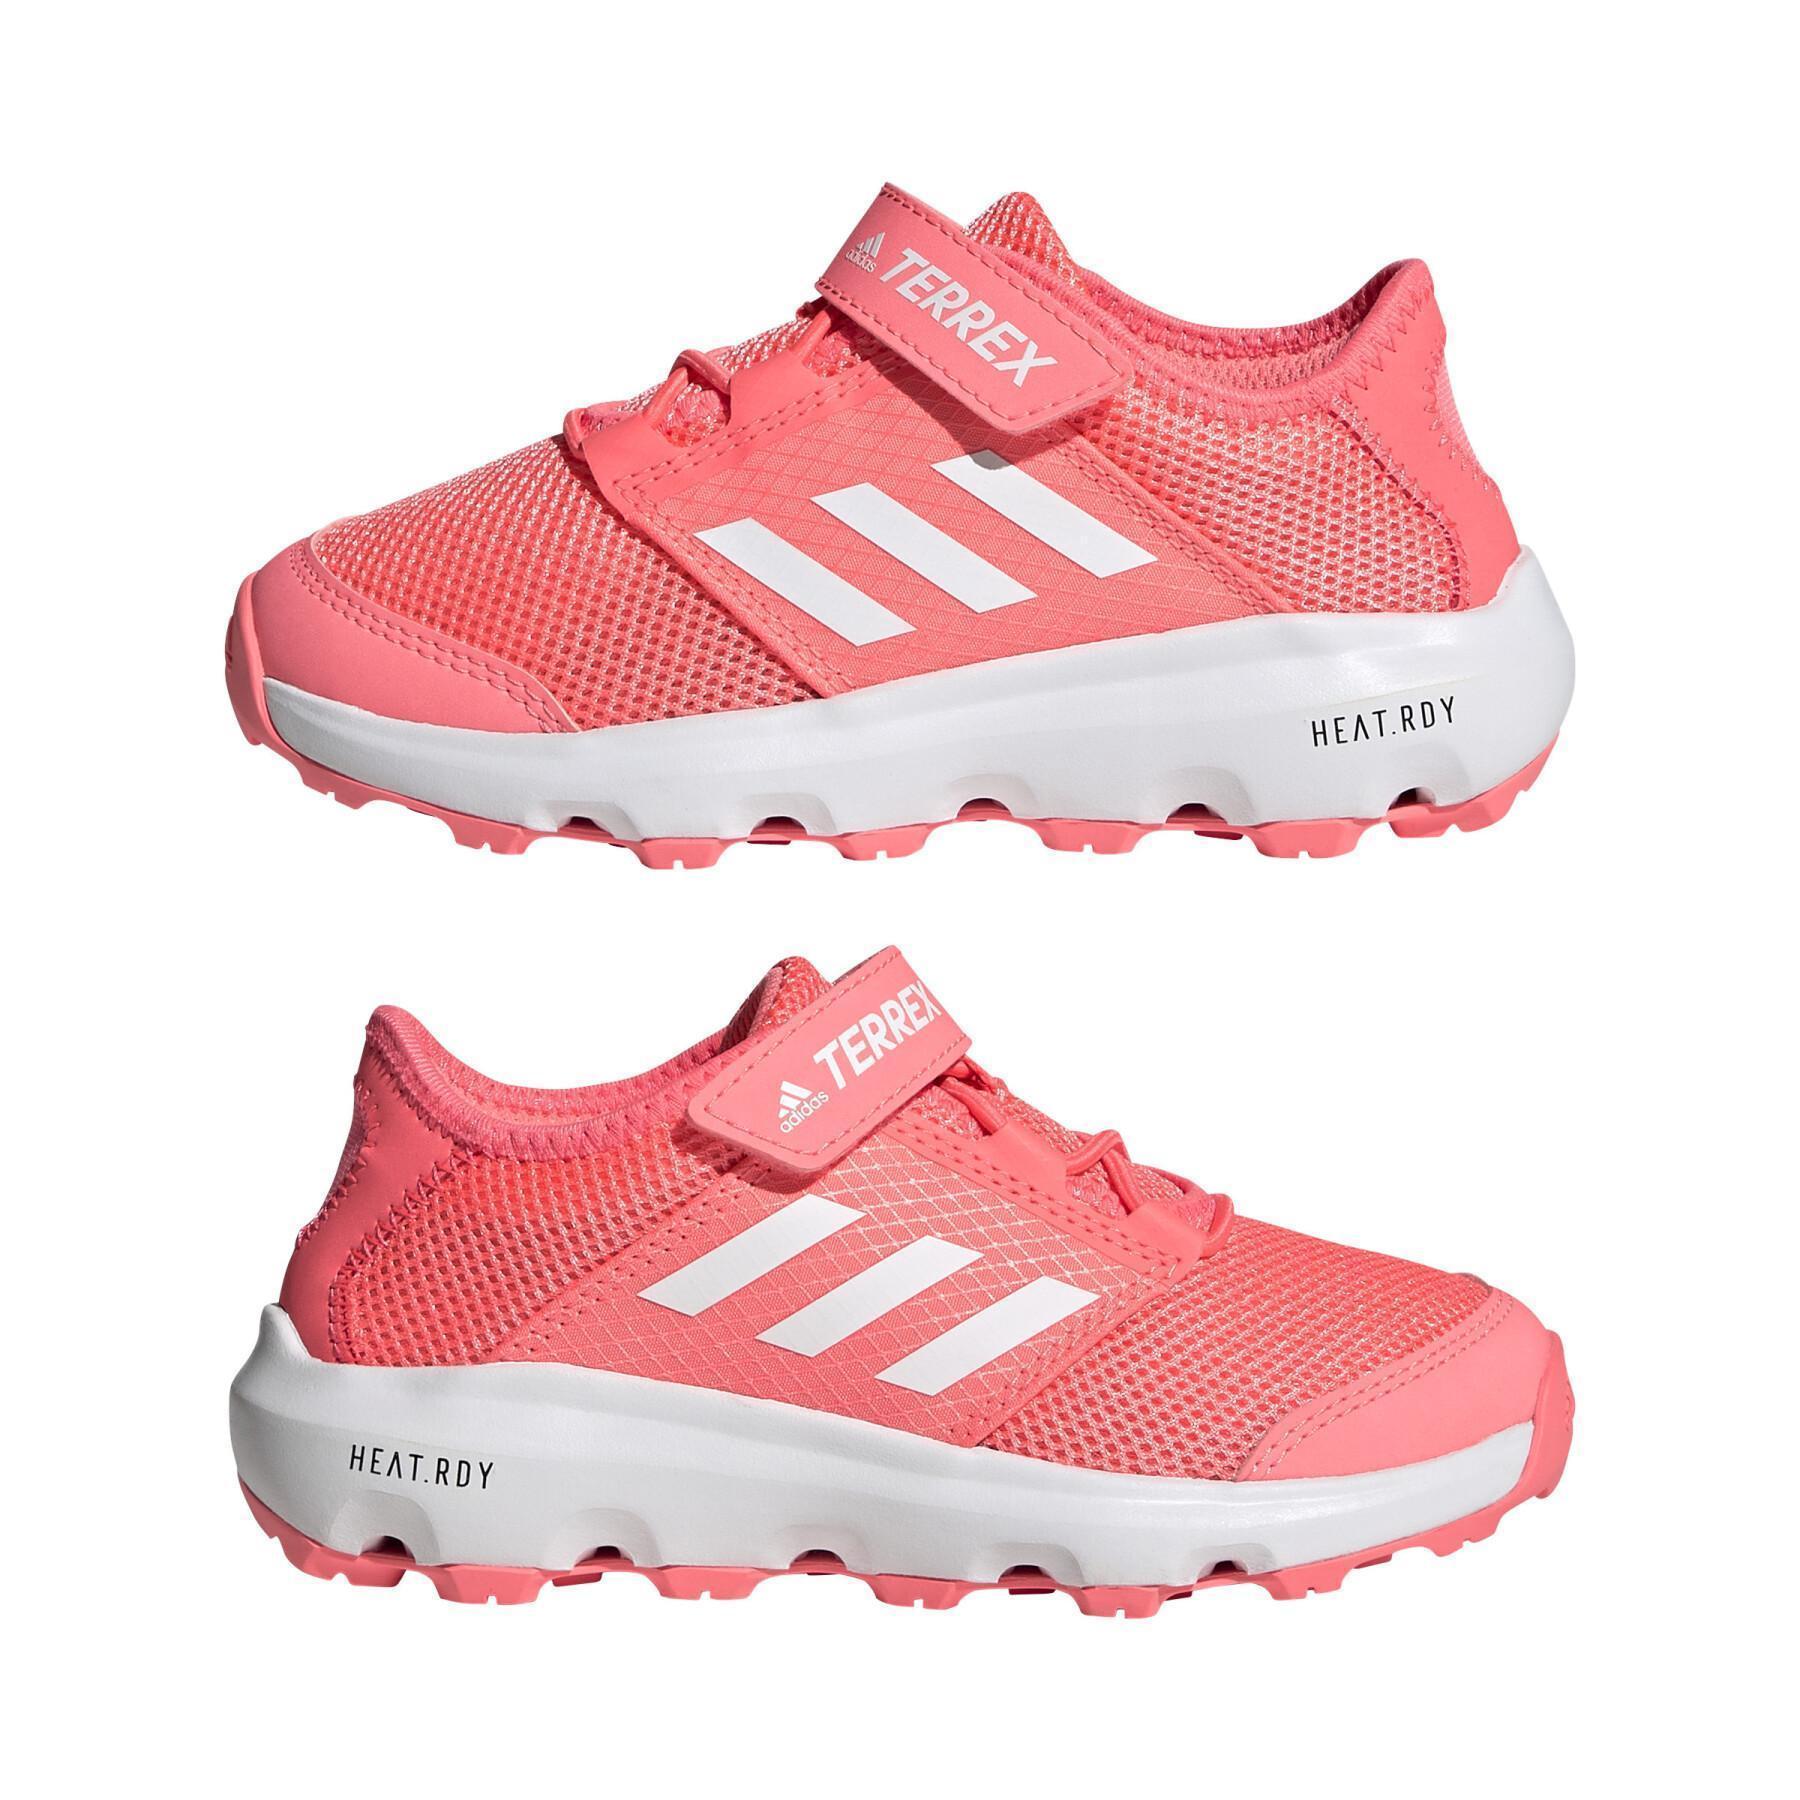 Chaussures enfant adidas Terrex Climacool Voyager Cfater